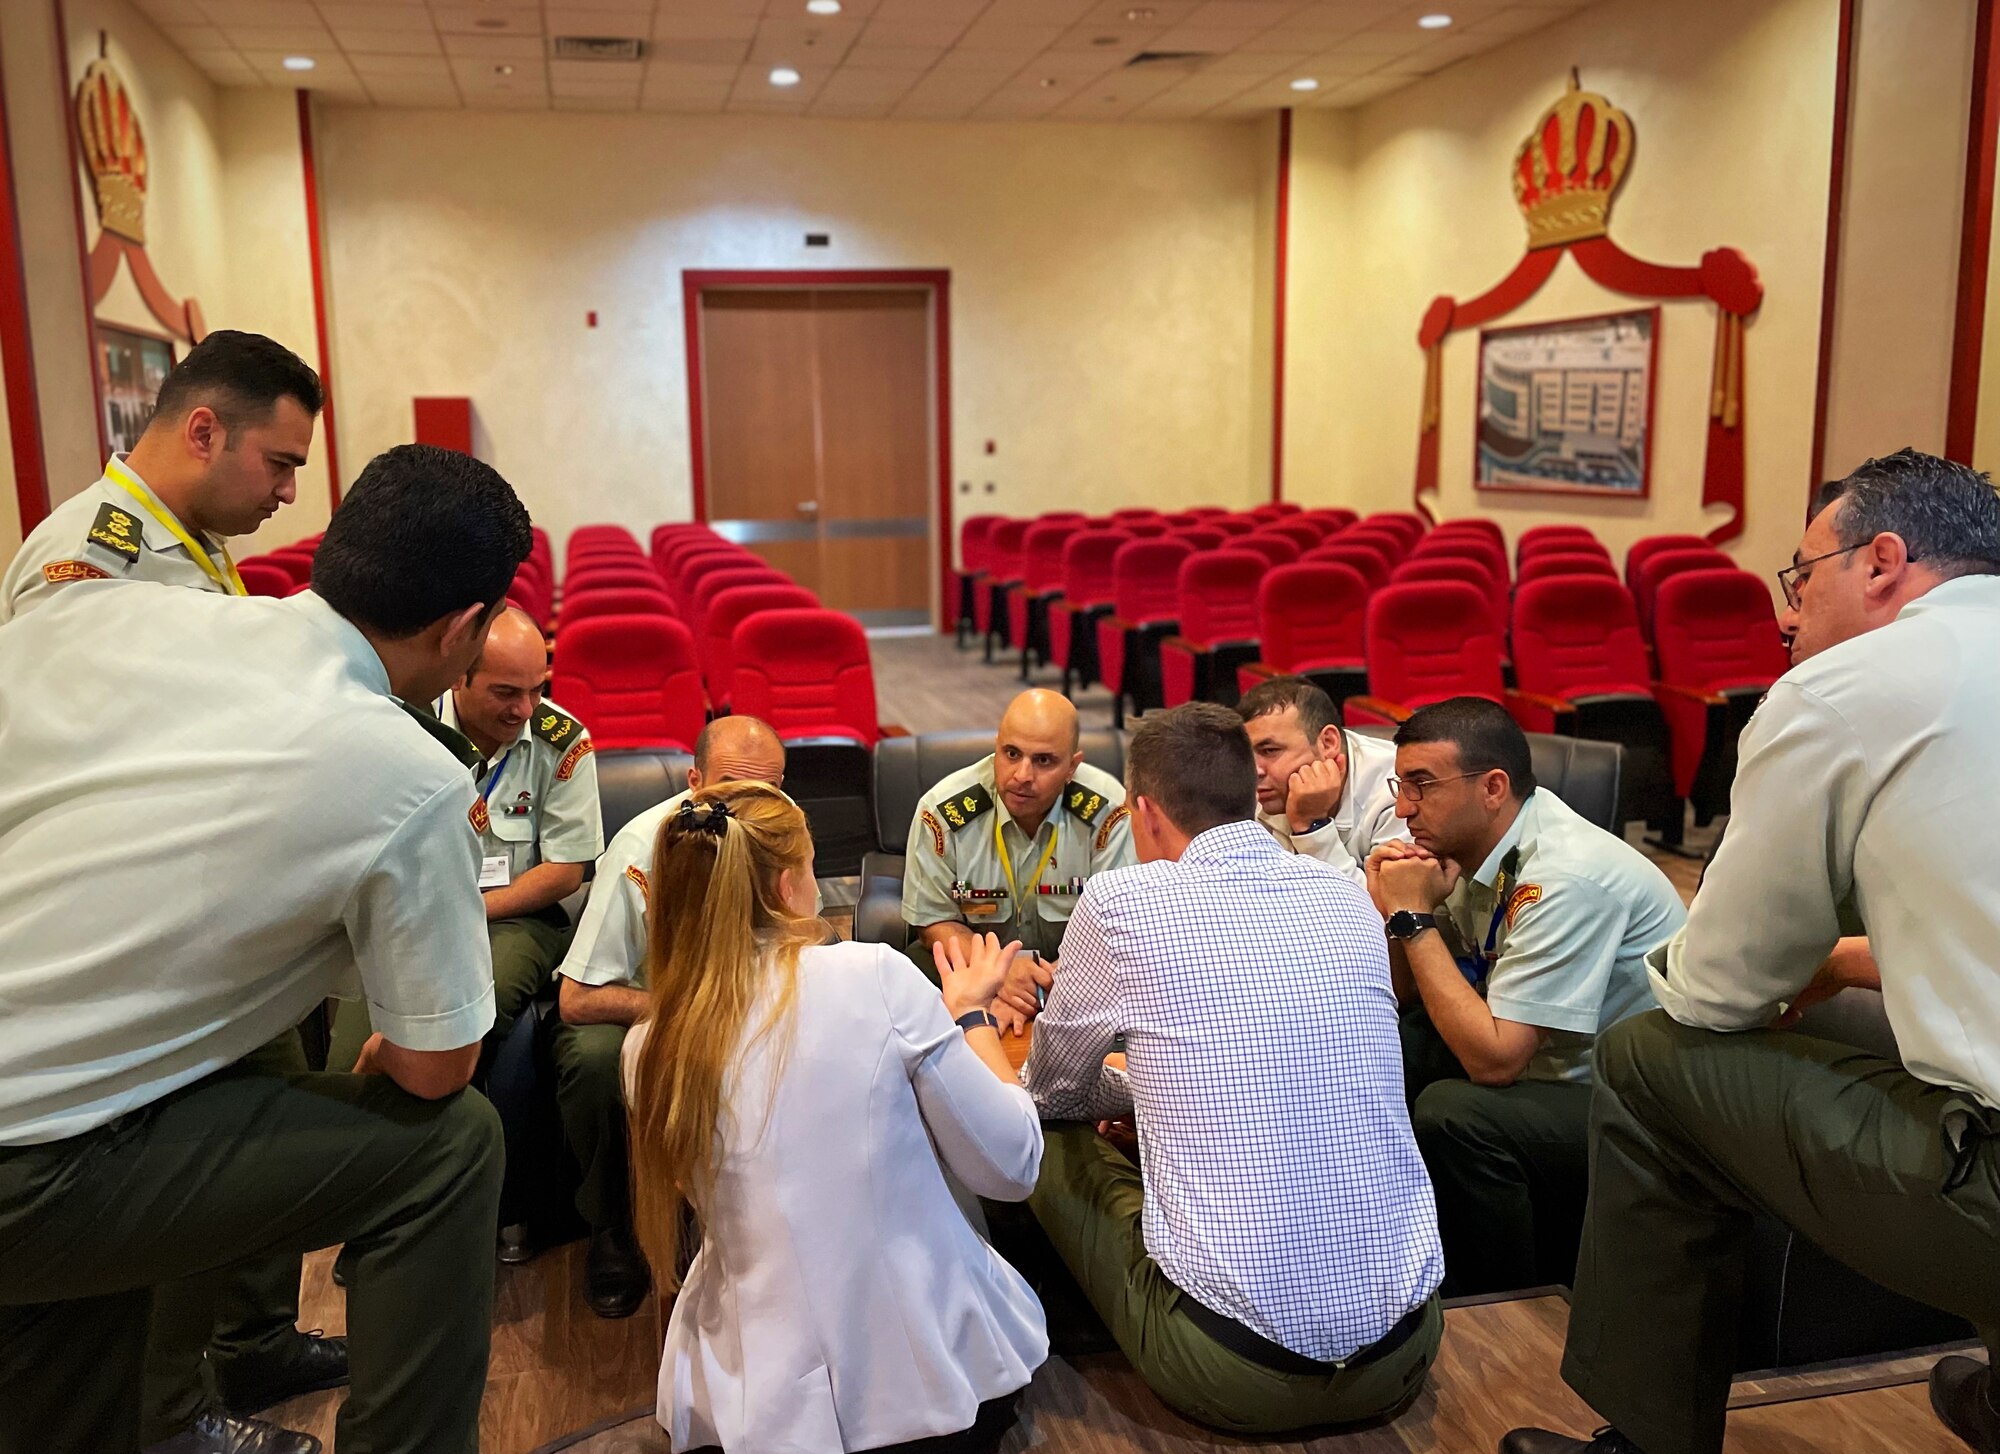 Jordanian Royal Medical Service doctors exchange ideas with Lt. Cmdr. Taylor DesRosiers, Walter Reed Medical Center critical care fellow, and Lt. Col. Erik DeSoucy, Brooke Army Medical Center inside the King Hussein Medical Center May 11, 2022 in Amman, Jordan.